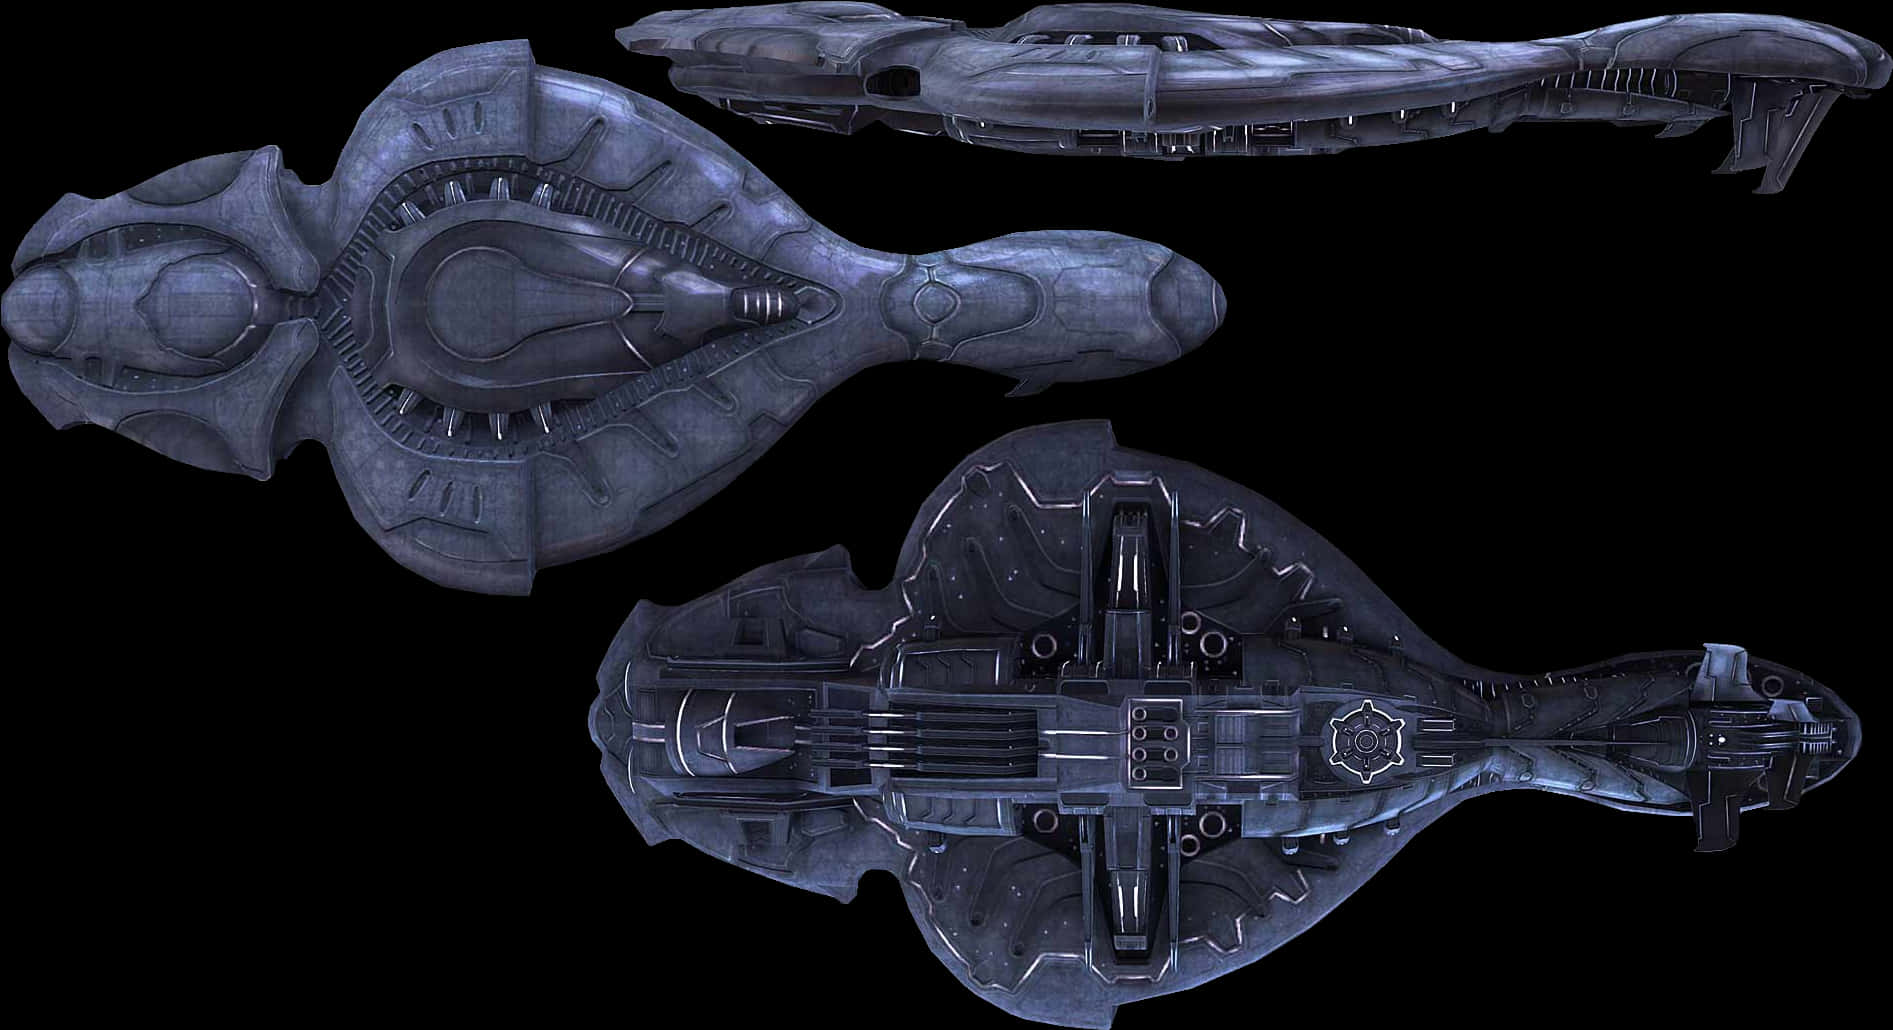 A Group Of Spaceships On A Black Background